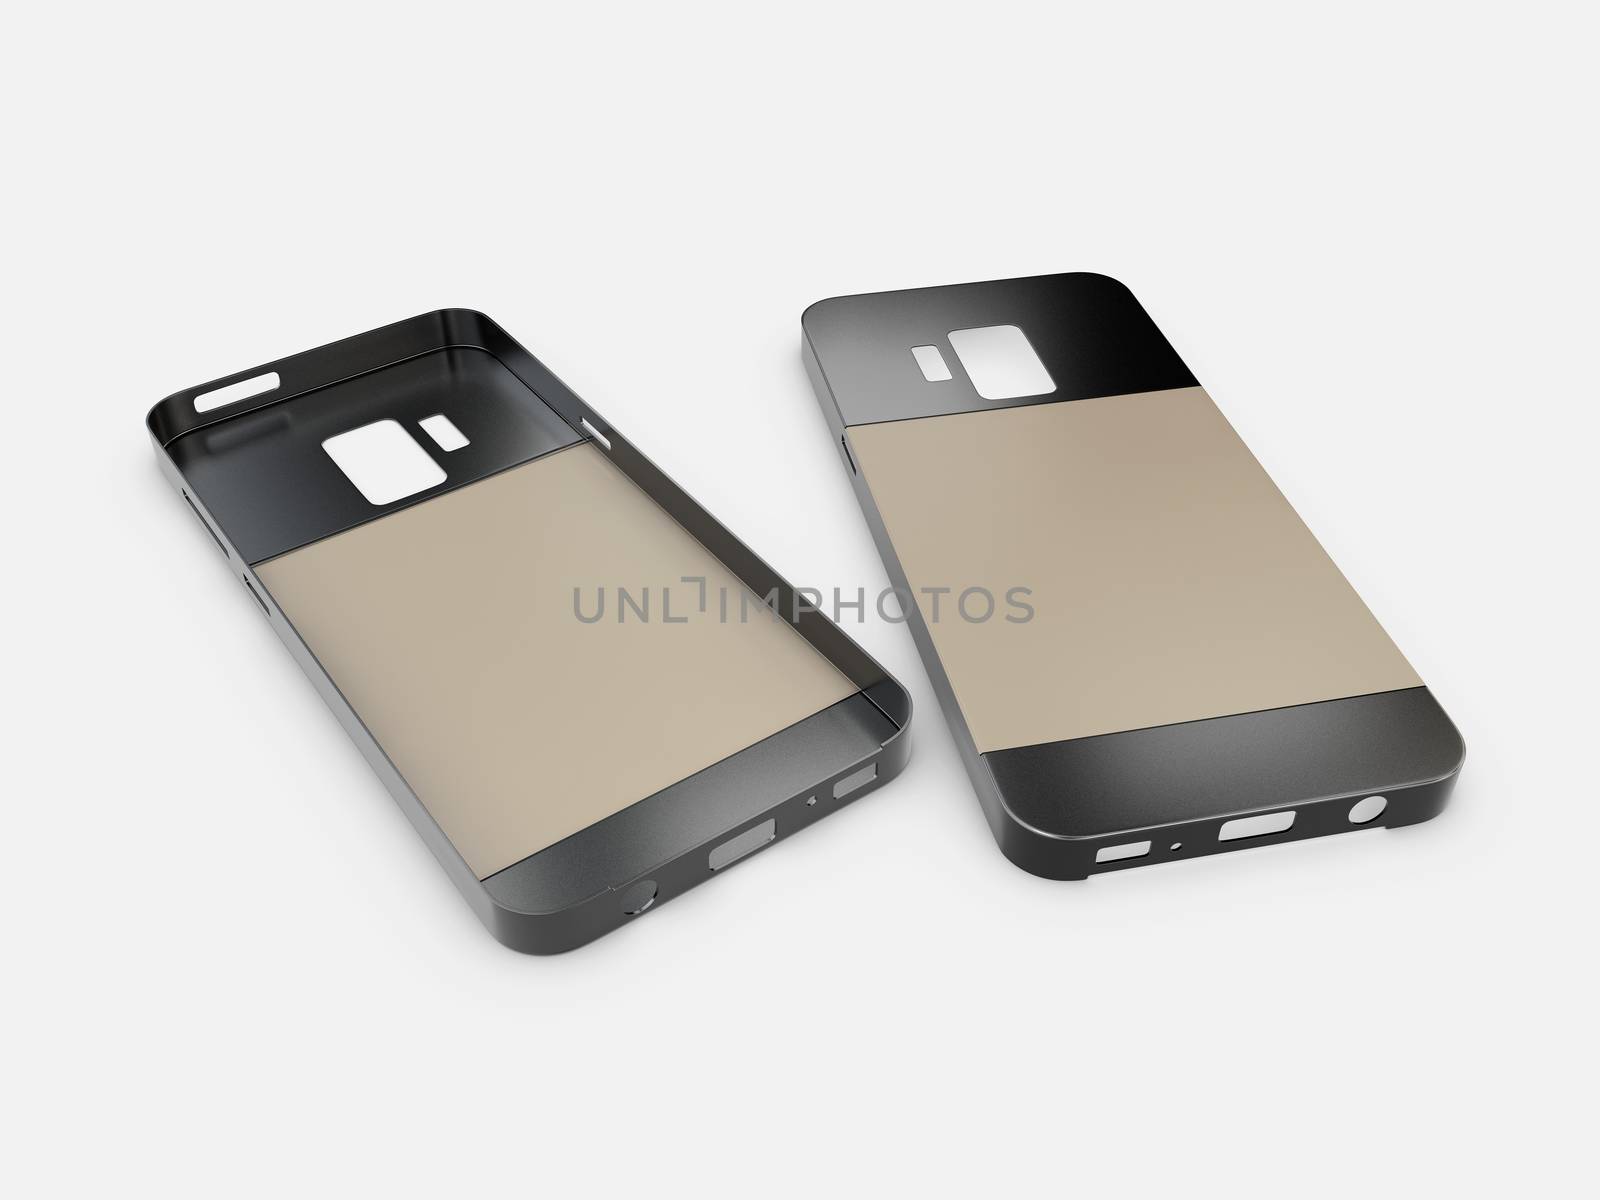 3d Illustration of smartphone back cover on a white background.